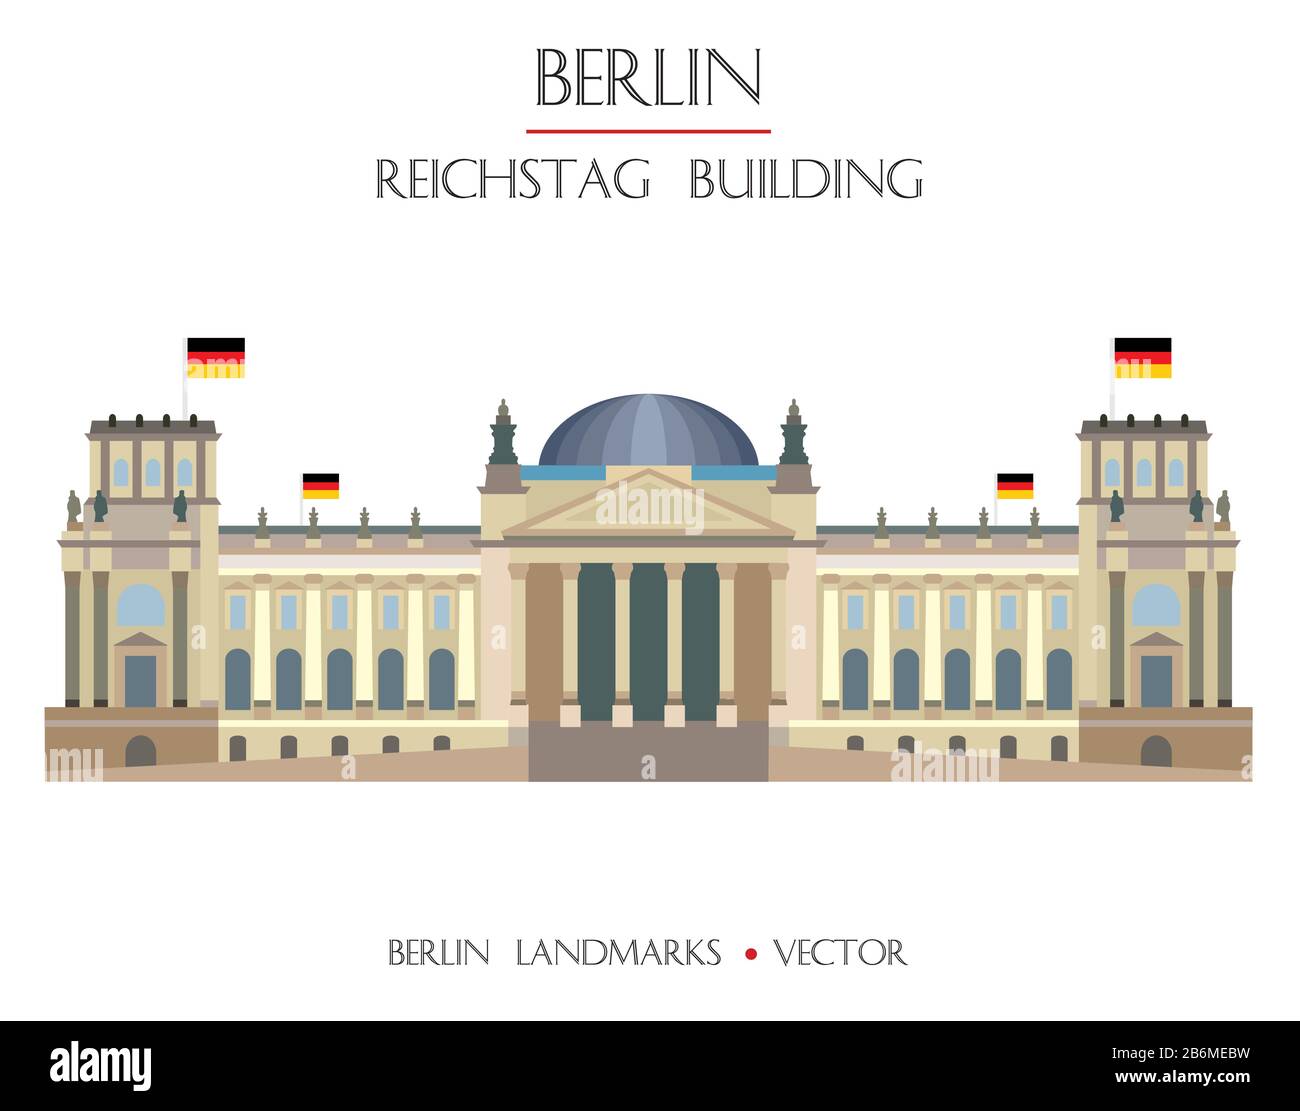 Reichstag Cut Out Stock Images & Pictures - Alamy